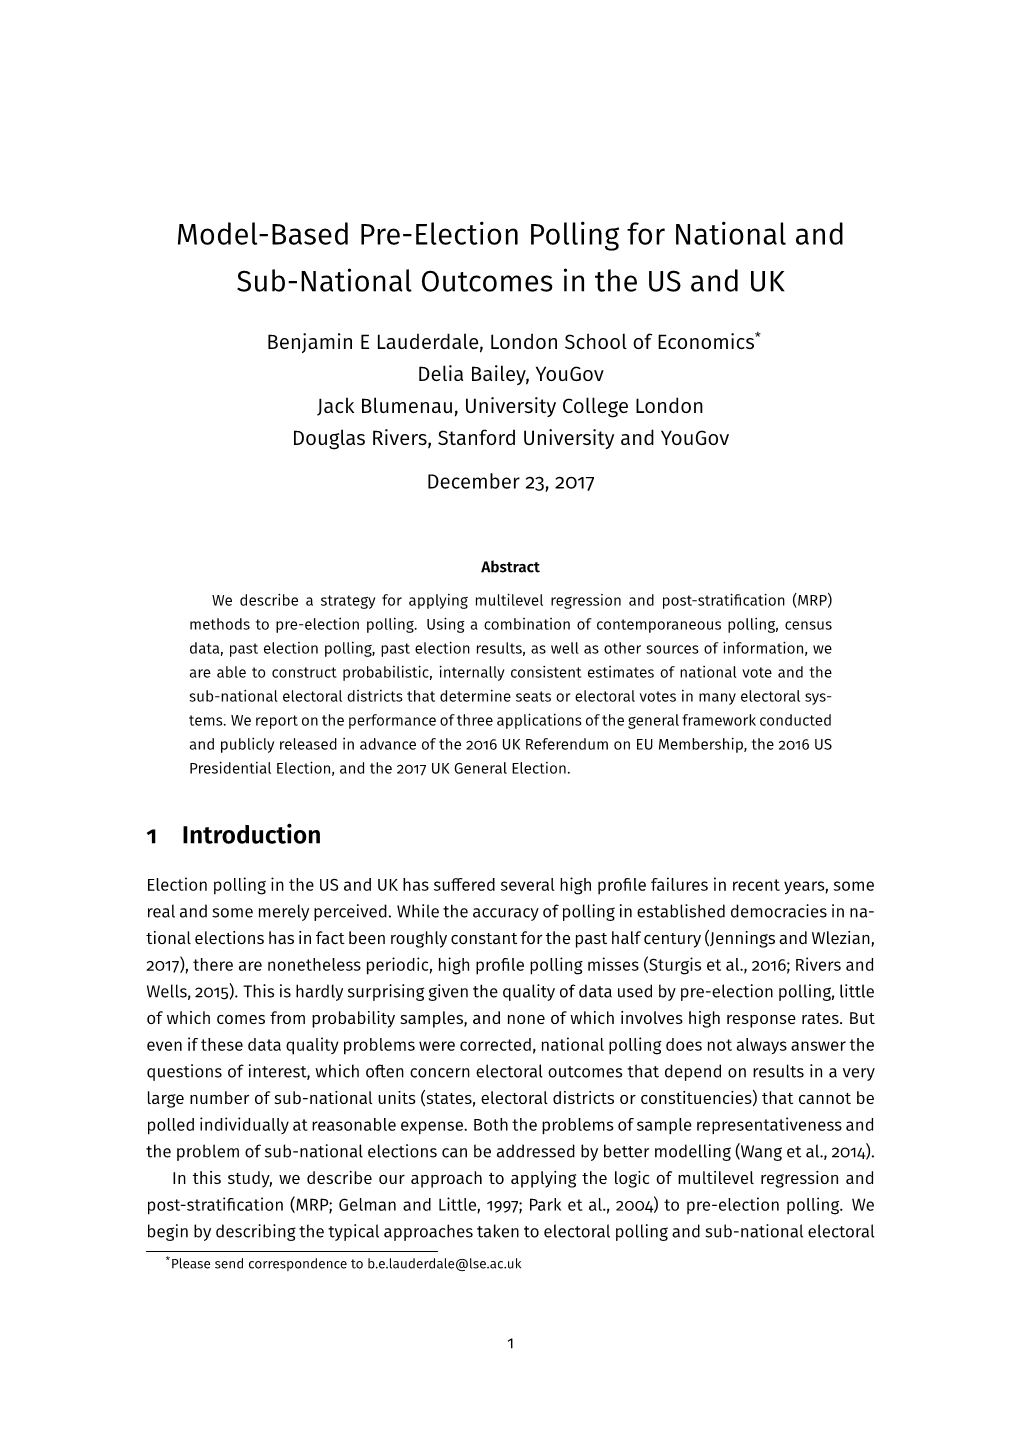 Model-Based Pre-Election Polling for National and Sub-National Outcomes in the US and UK